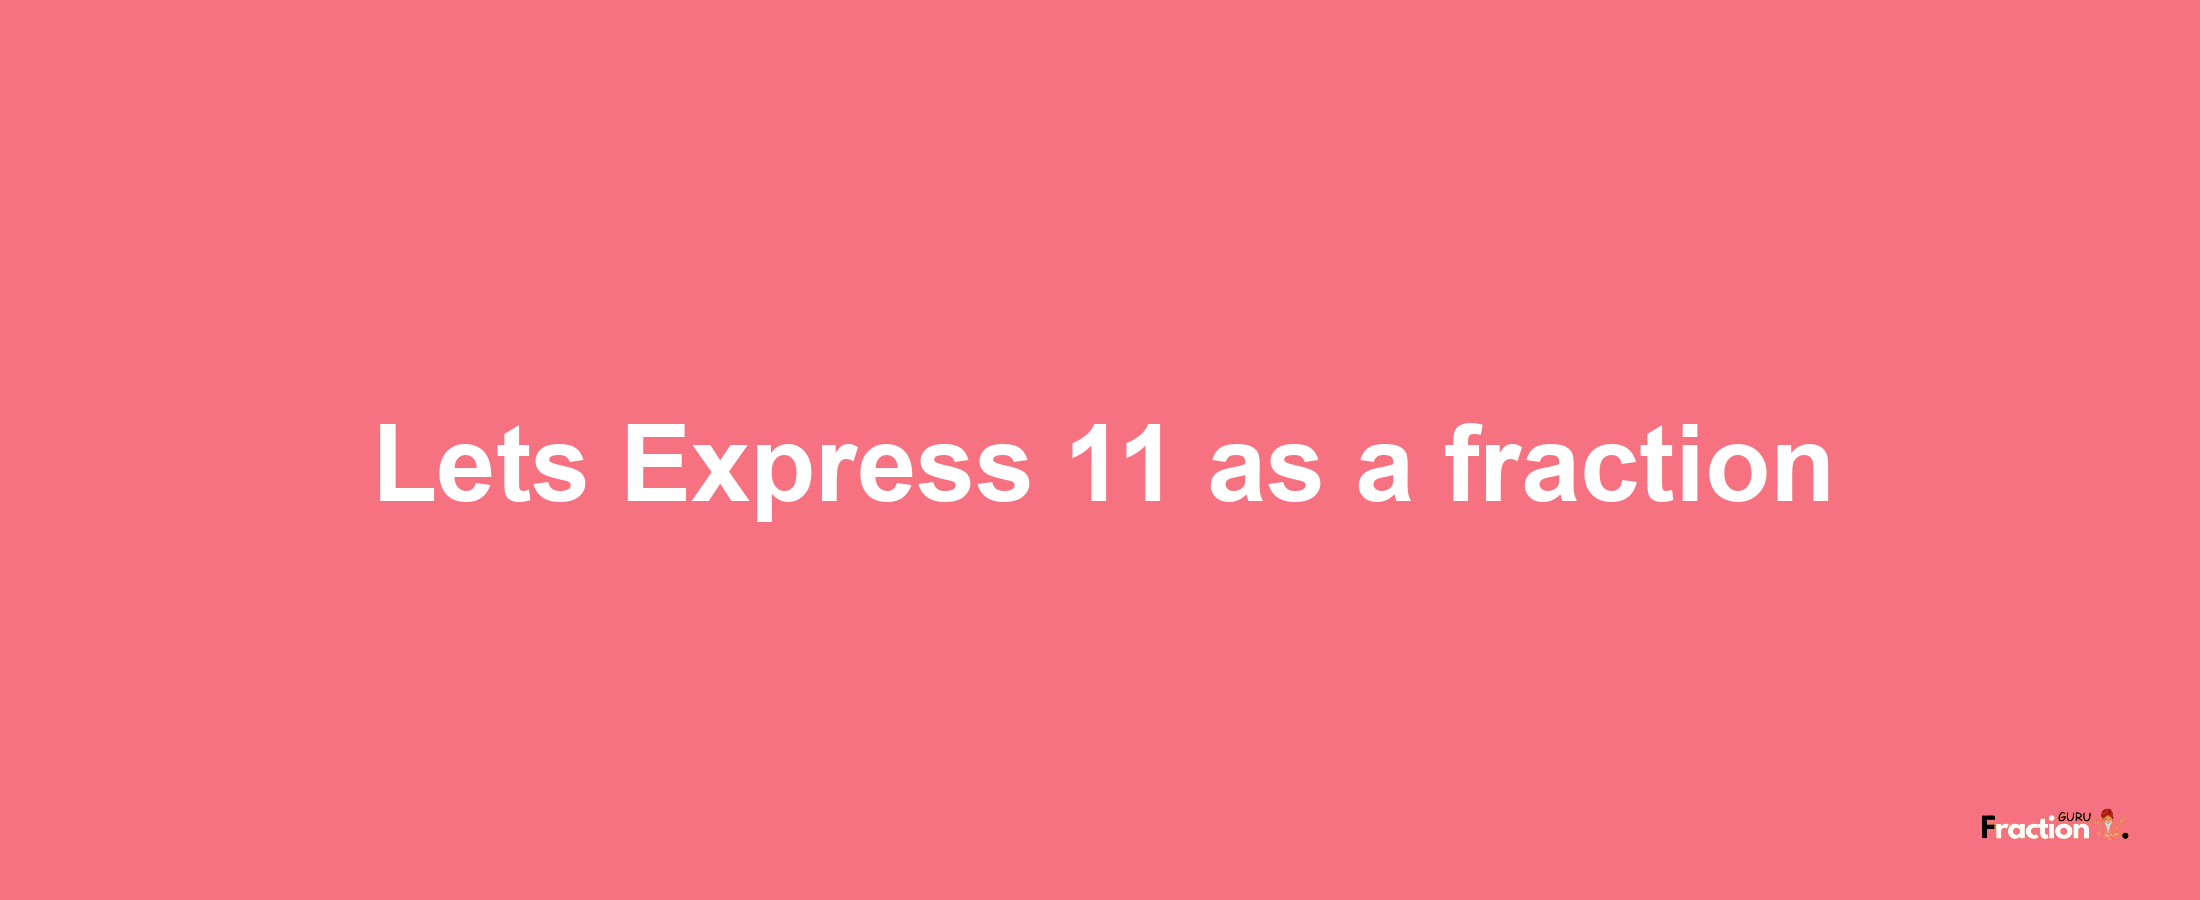 Lets Express 11 as afraction